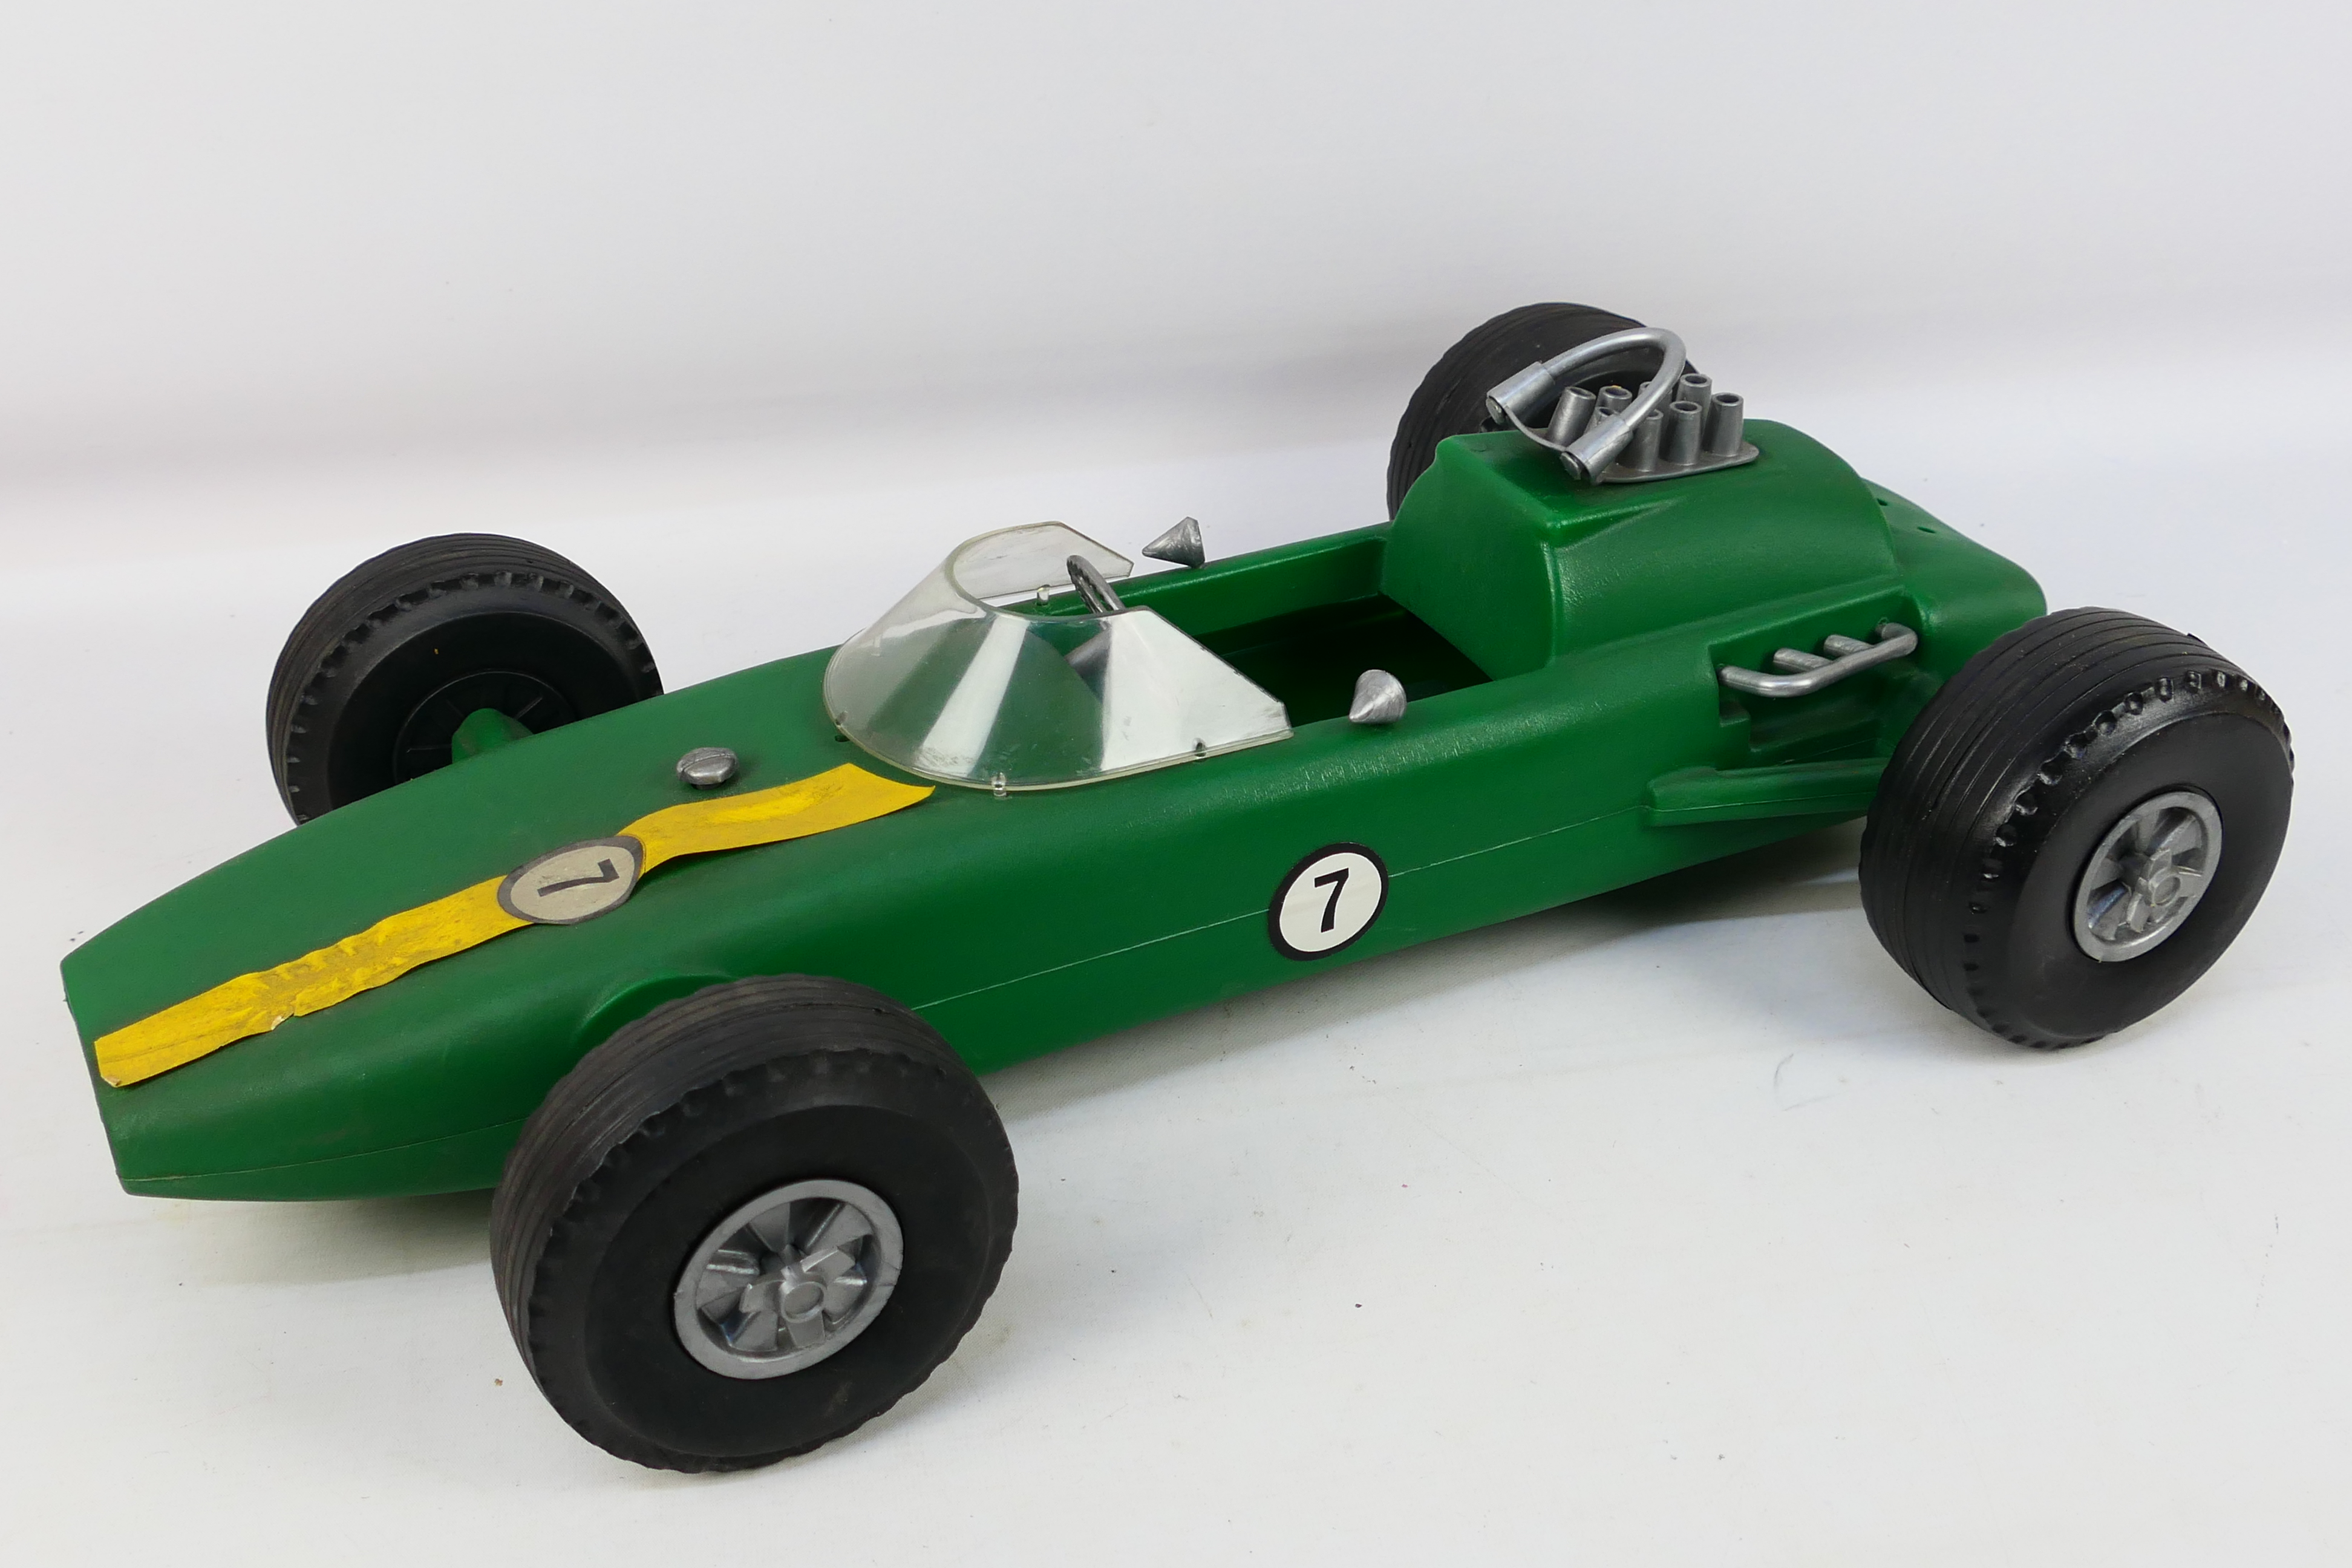 Palitoy - Action Man - An Action Man Grange Prix Racing Car (#34810) 60cm long This item is the car - Image 2 of 9